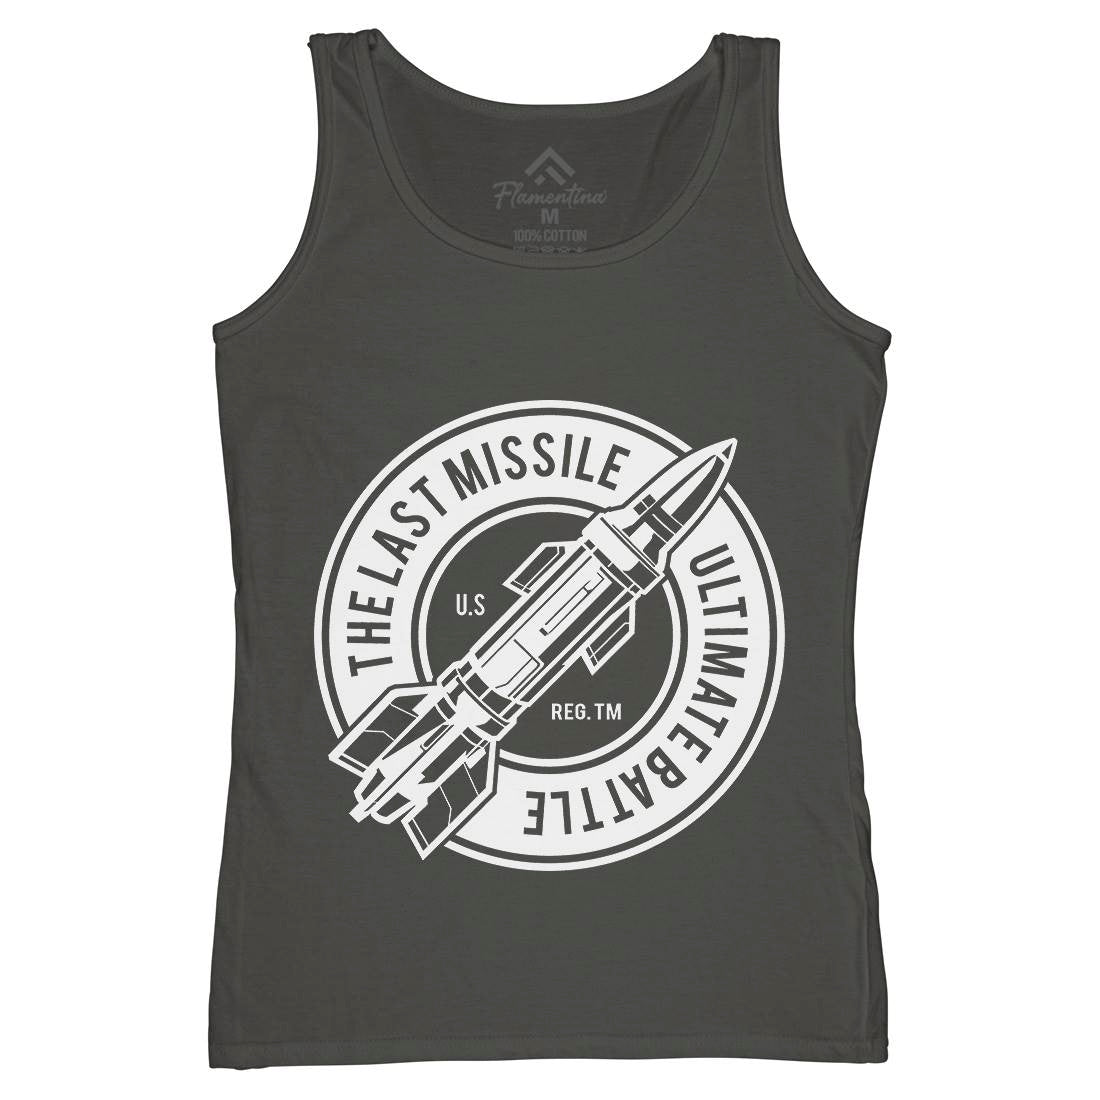 Last Missile Womens Organic Tank Top Vest Army A175